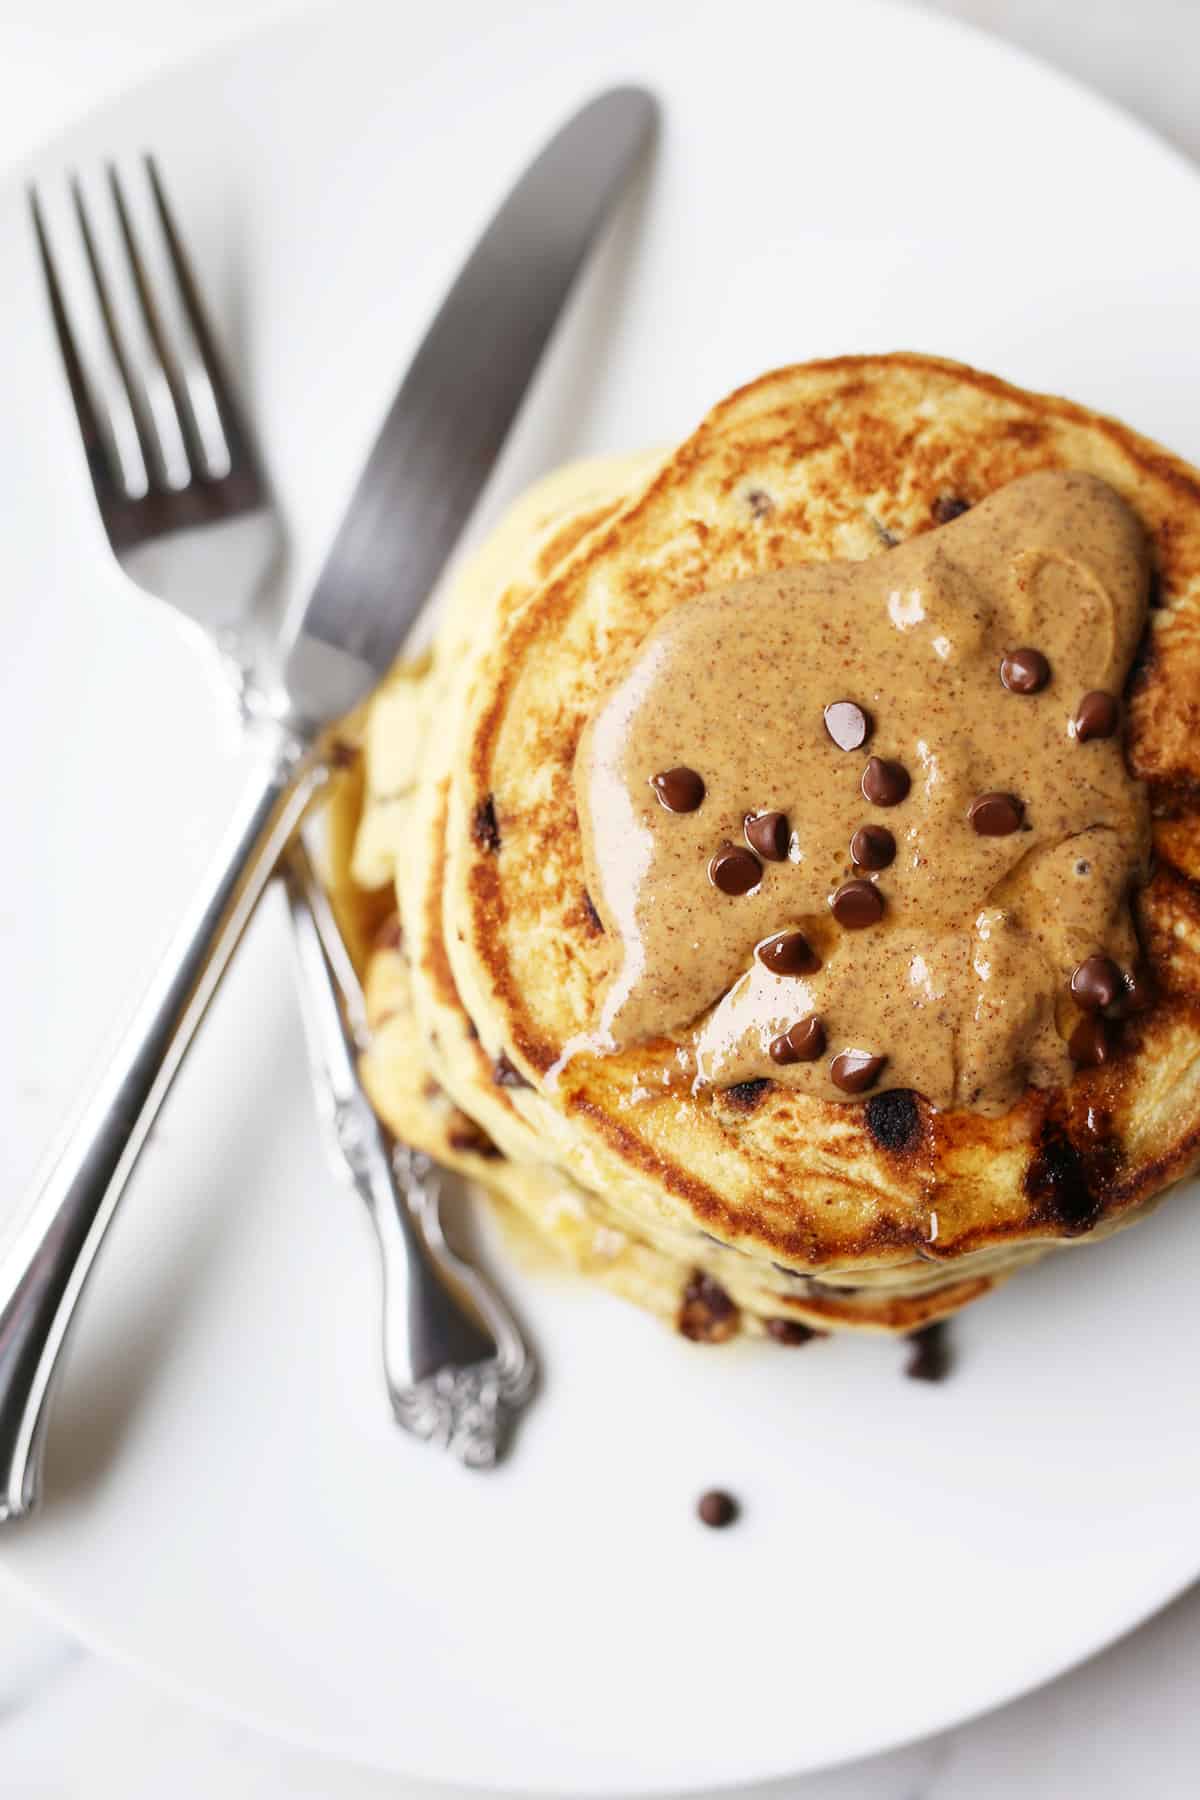 Best Homemade Chocolate Chip Pancakes Ever! Soft, Vegan and gluten free, quick and easy to make, freezer friendly, healthy and totally delicious!